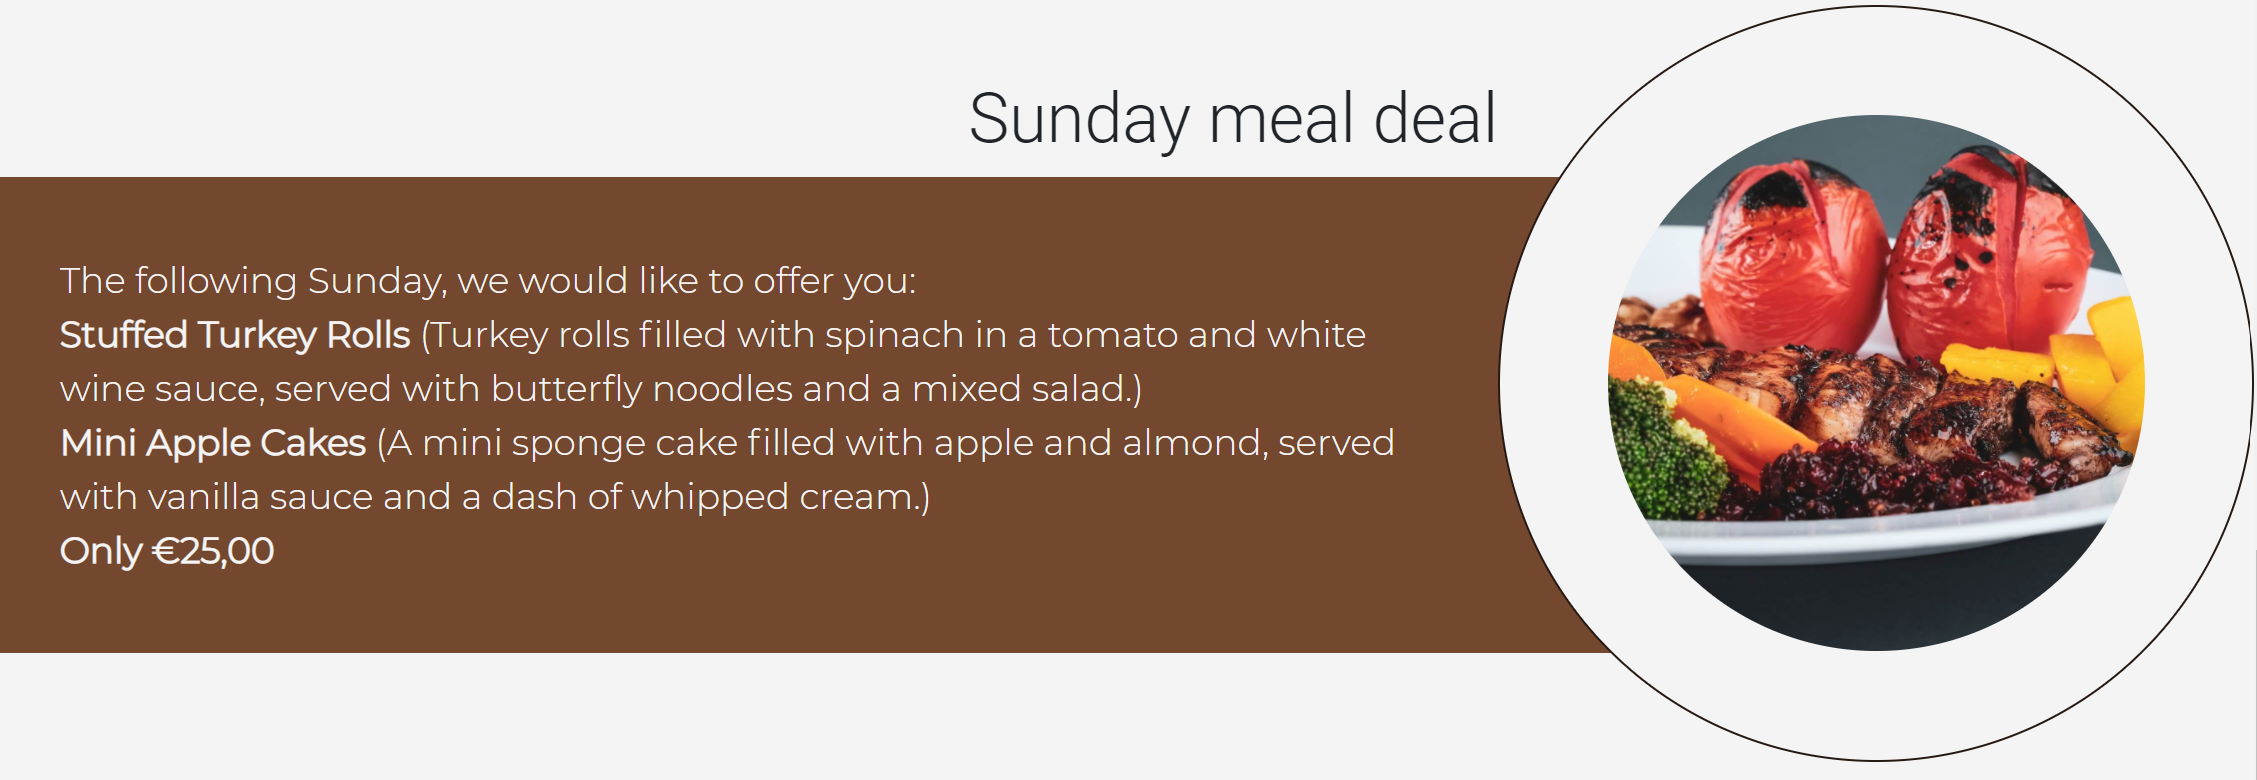 feature-meal-deal.jpg